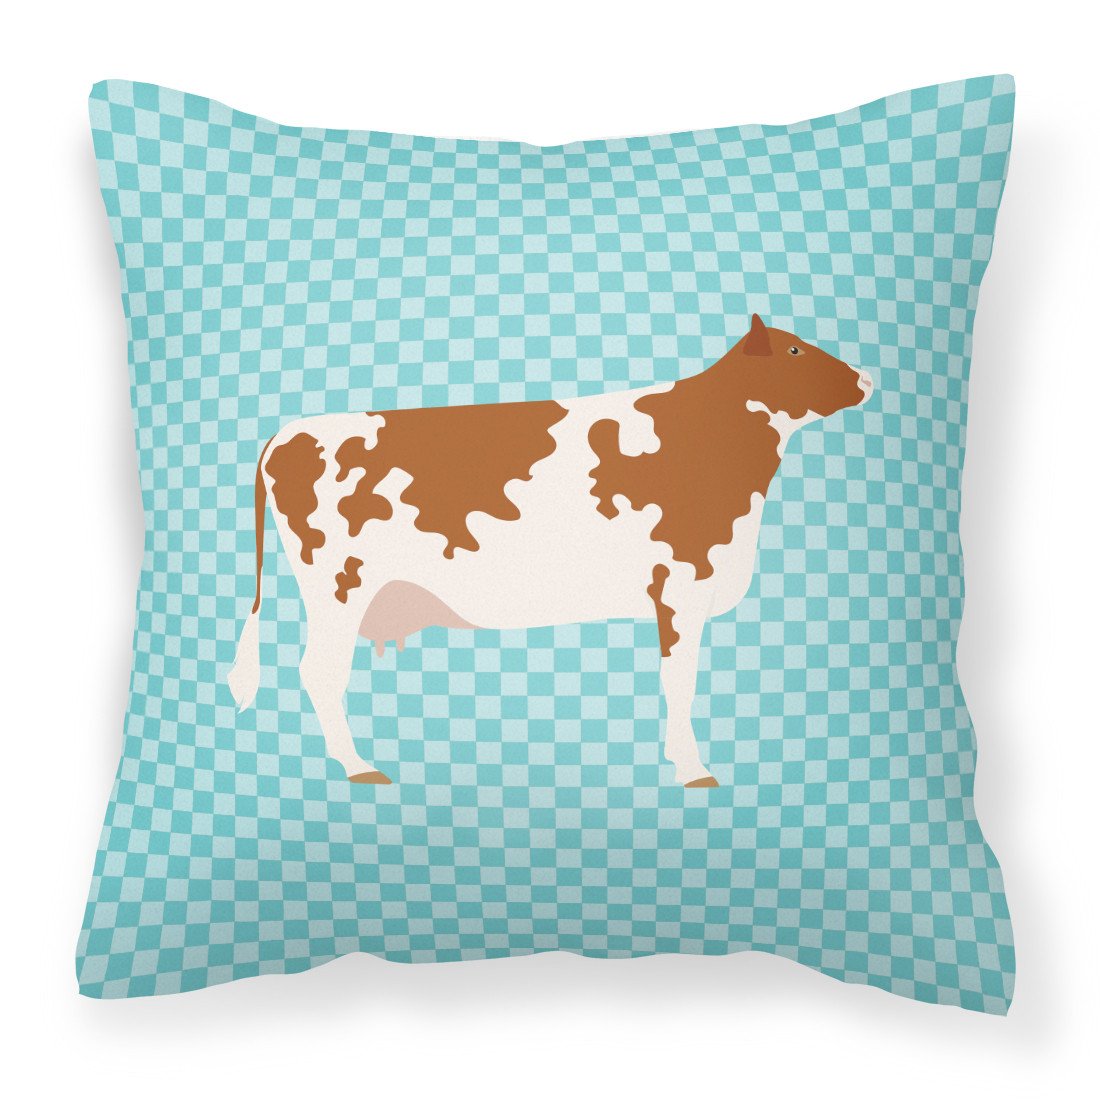 Ayrshire Cow Blue Check Fabric Decorative Pillow BB8001PW1818 by Caroline's Treasures